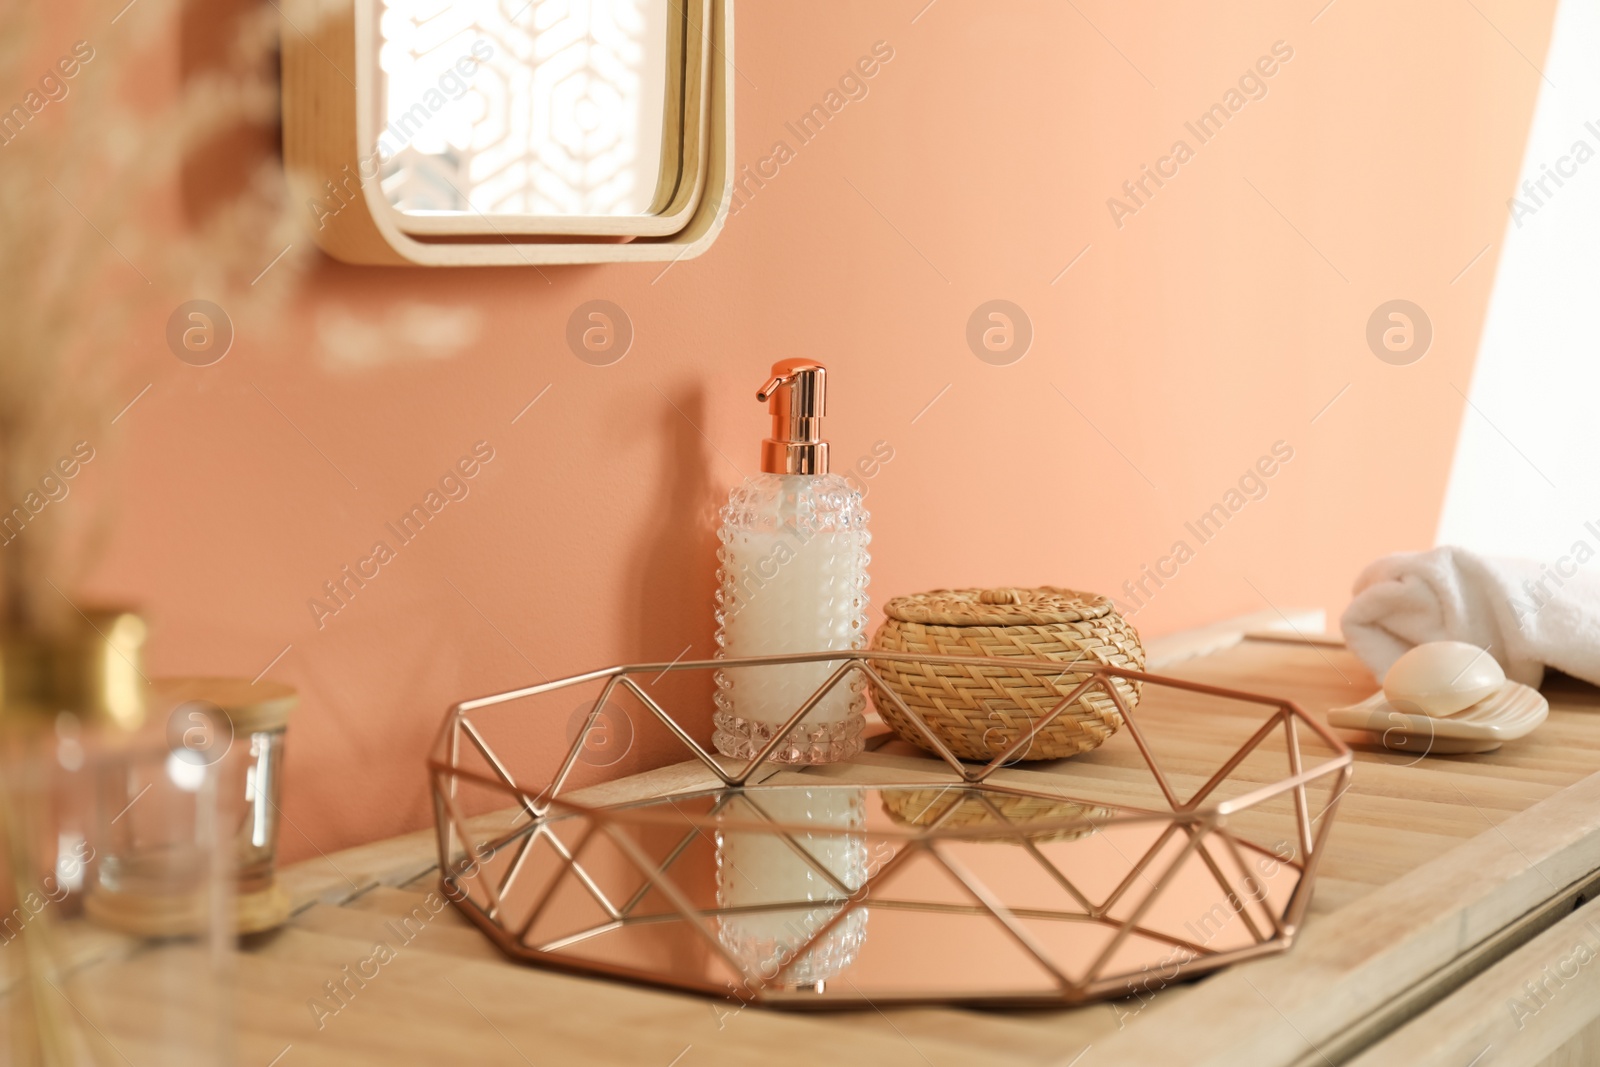 Photo of Soap dispenser and toiletries on wooden table indoors